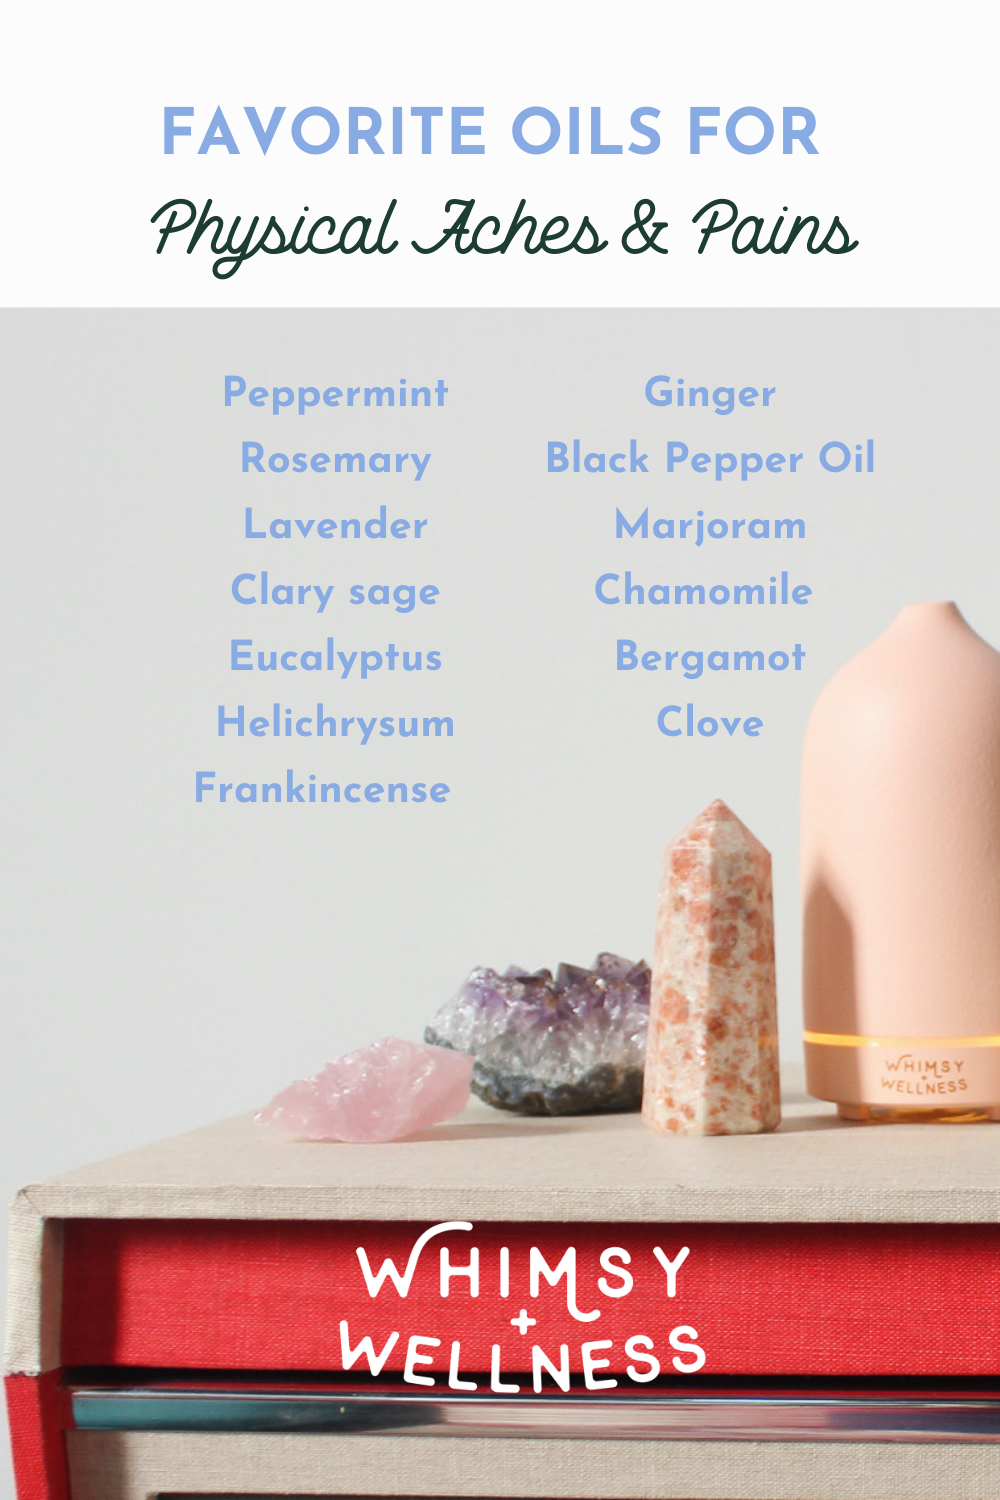 Favorite Oils for Aches & Pains